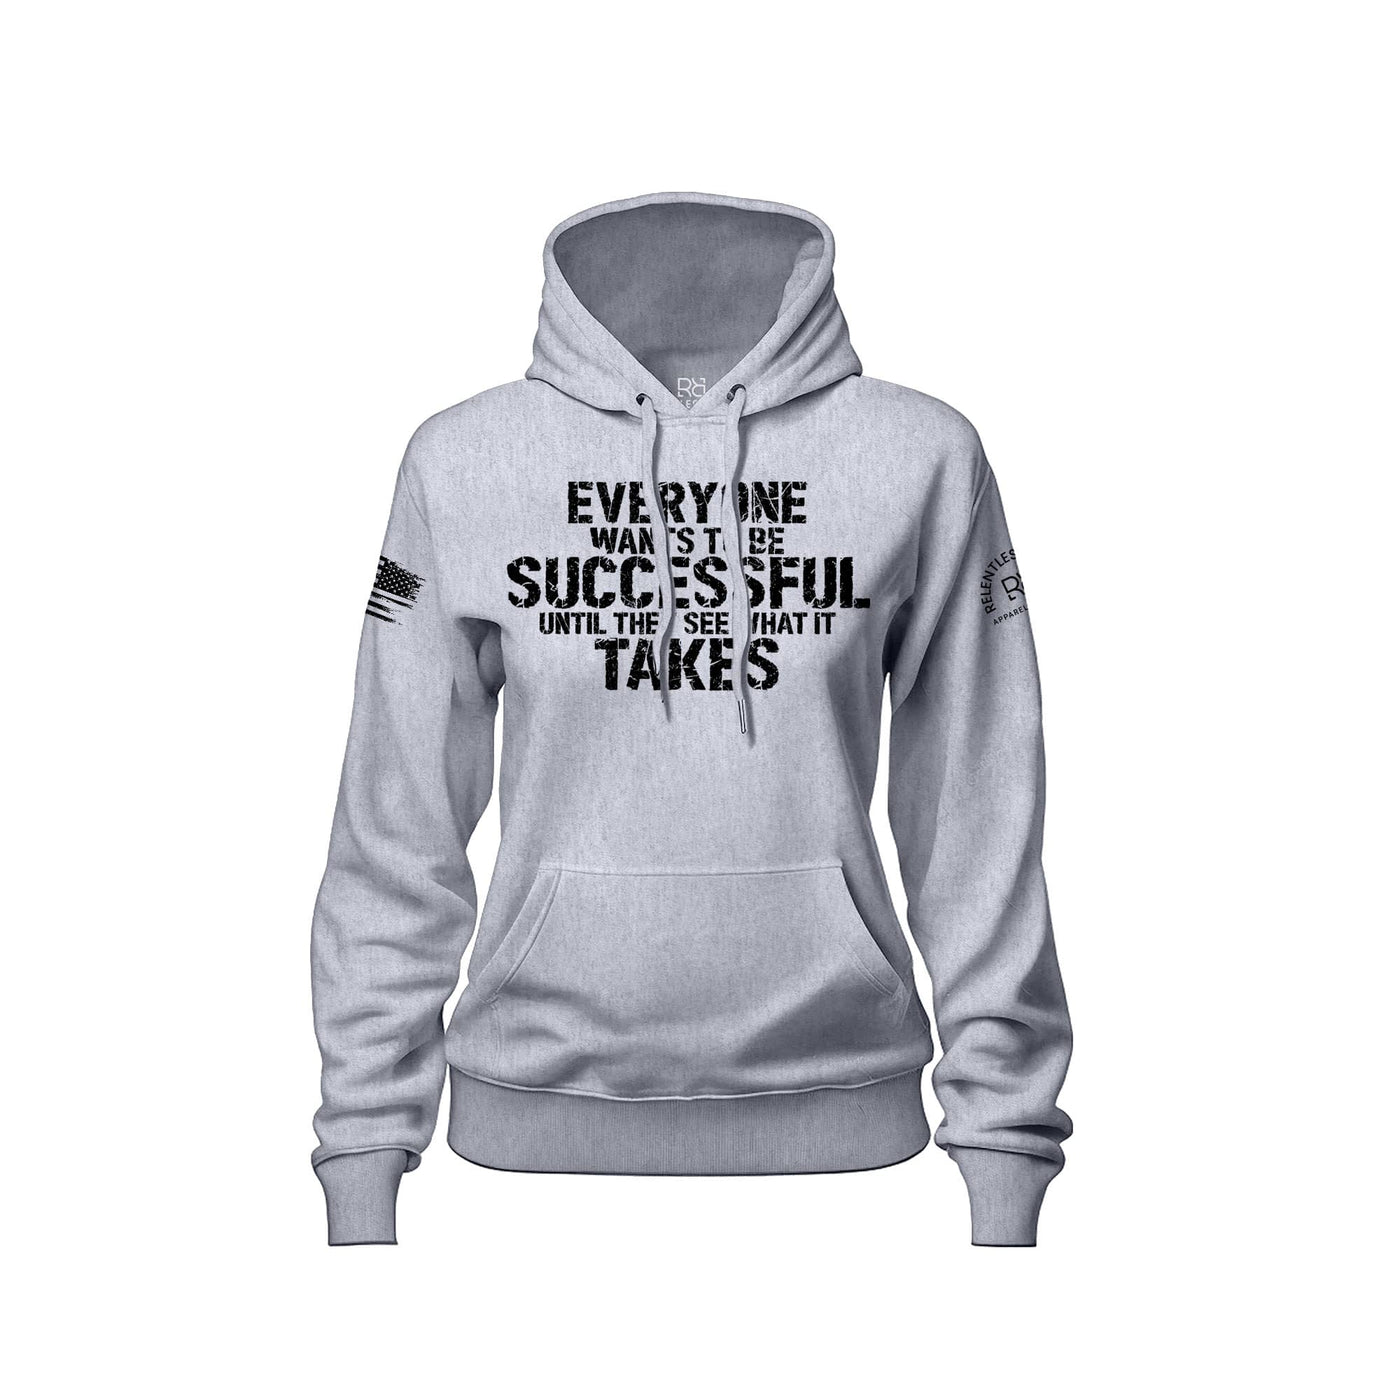 Everyone Wants to Be Successful... | Front | Women's Hoodie